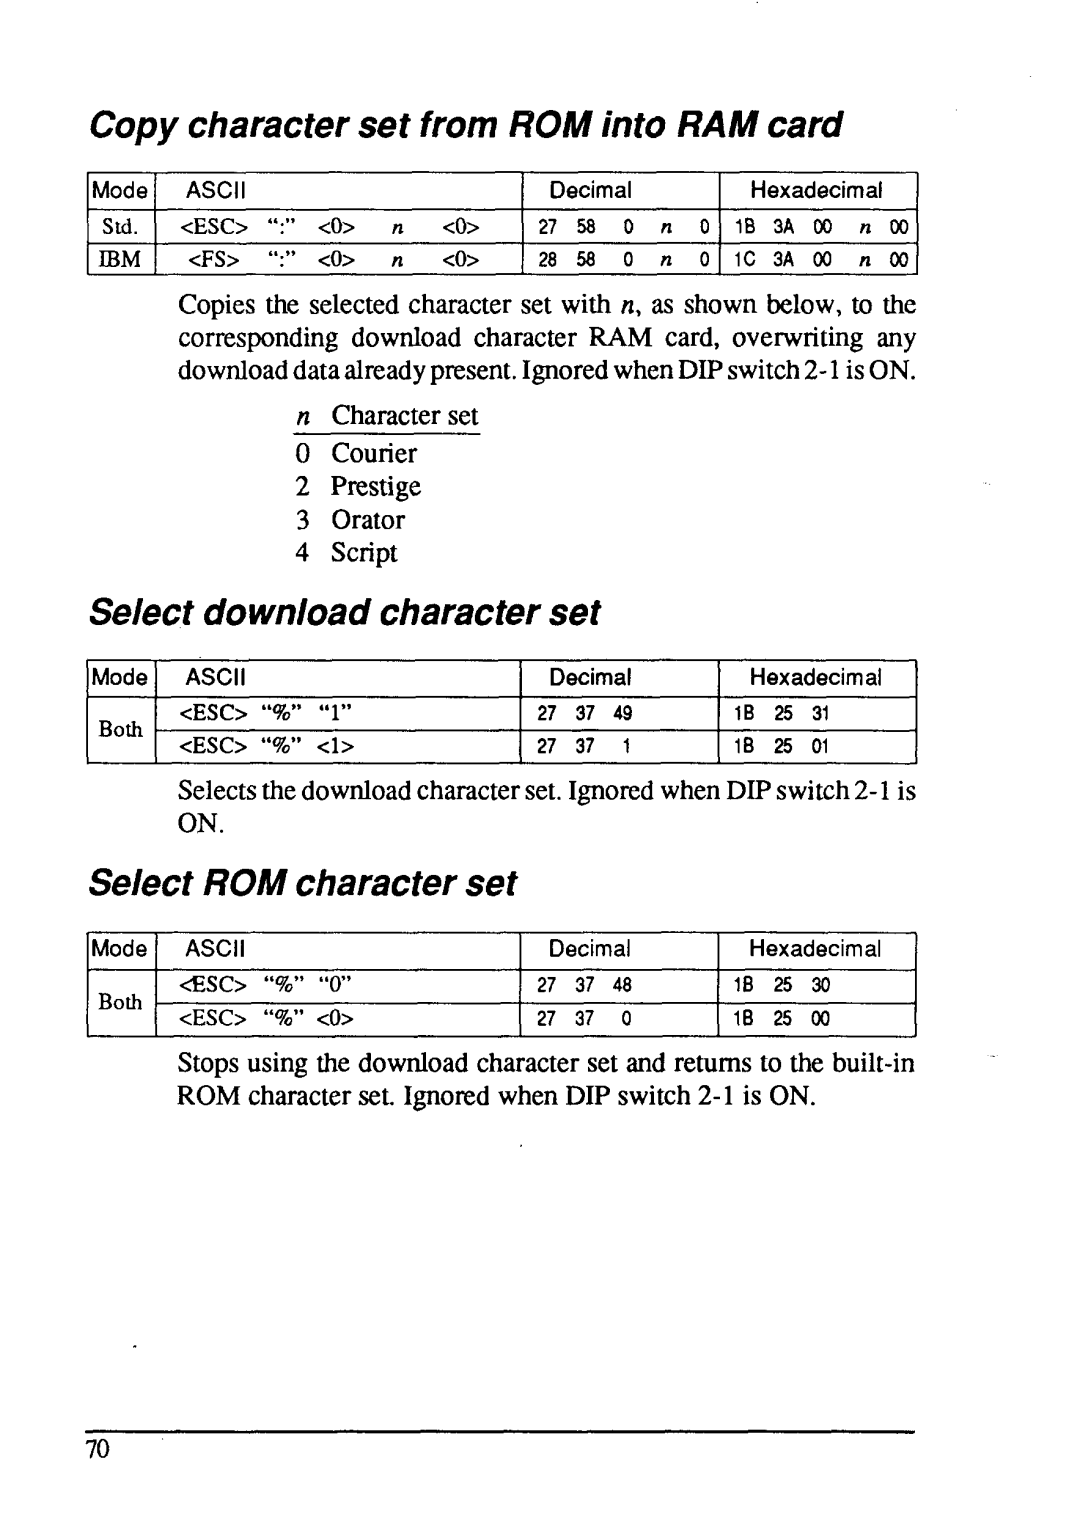 Star Micronics LC24-15 Copy character set from ROM into RAM card, Select download character set, Select ROM character set 